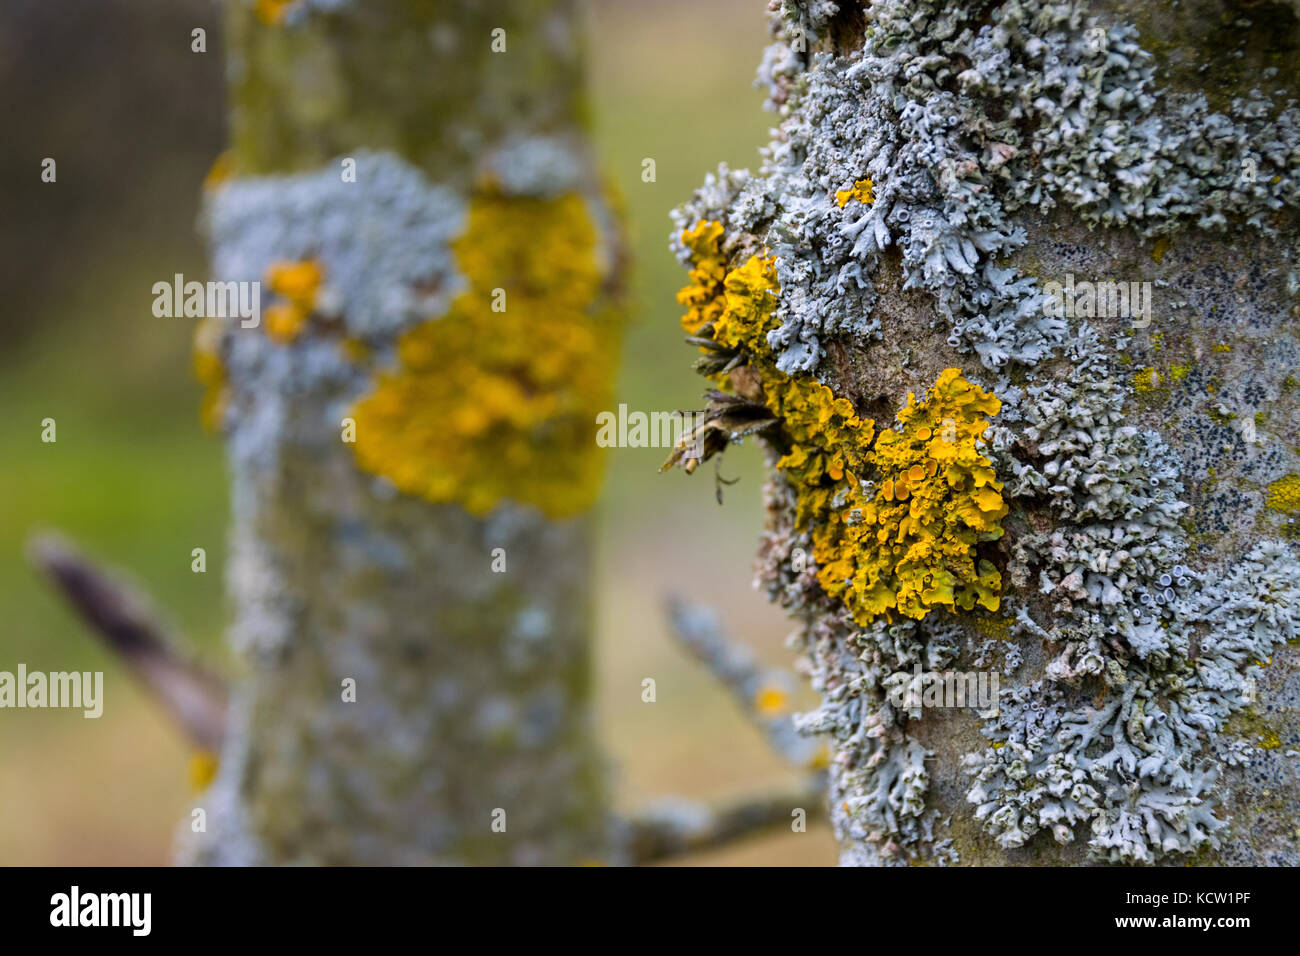 Close-Up Of Yellow Xanthoria Parietina And Blue Lichen Growing On Branch Stock Photo